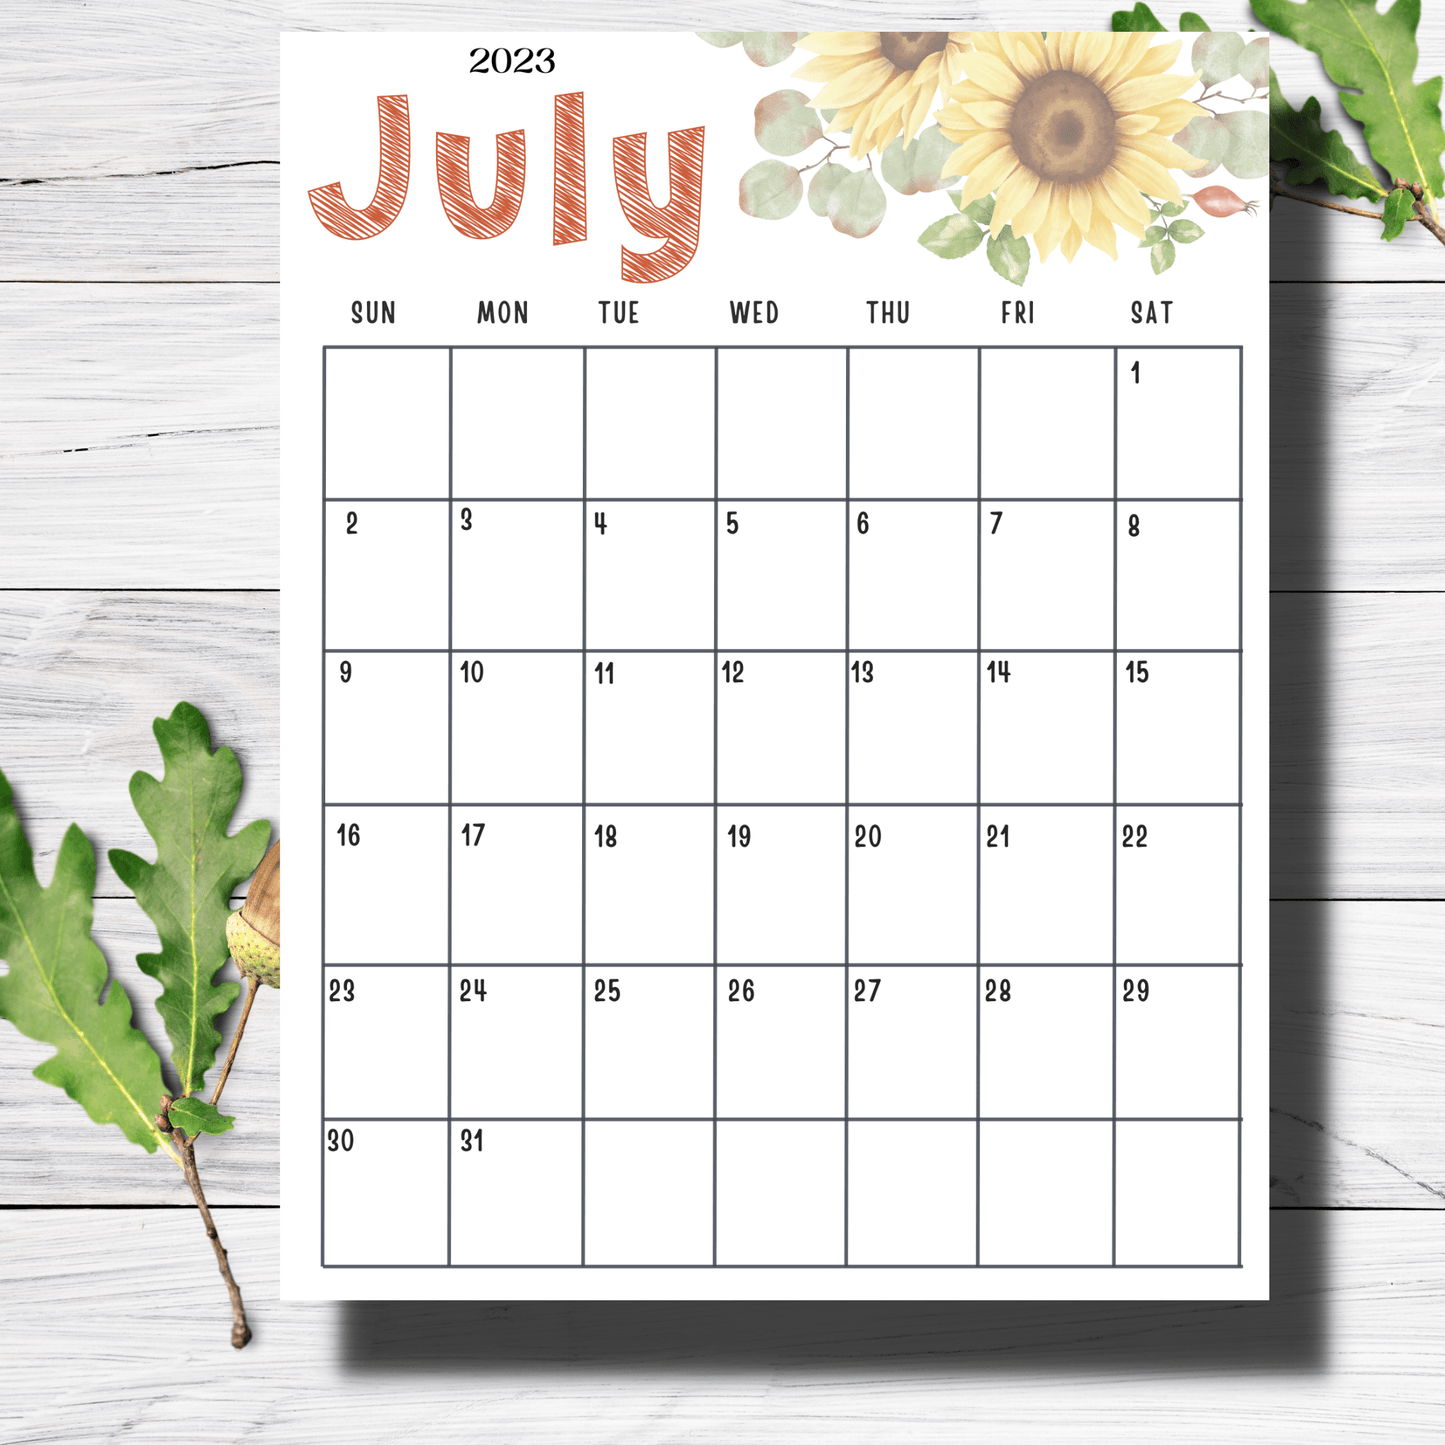 July 2023 Printable Calendar - Free Cute A4 8.5x11 in Size: Engaging Kids' Digital Planner - Instant Download Available in A4 | Download Now | Sarsari Creations